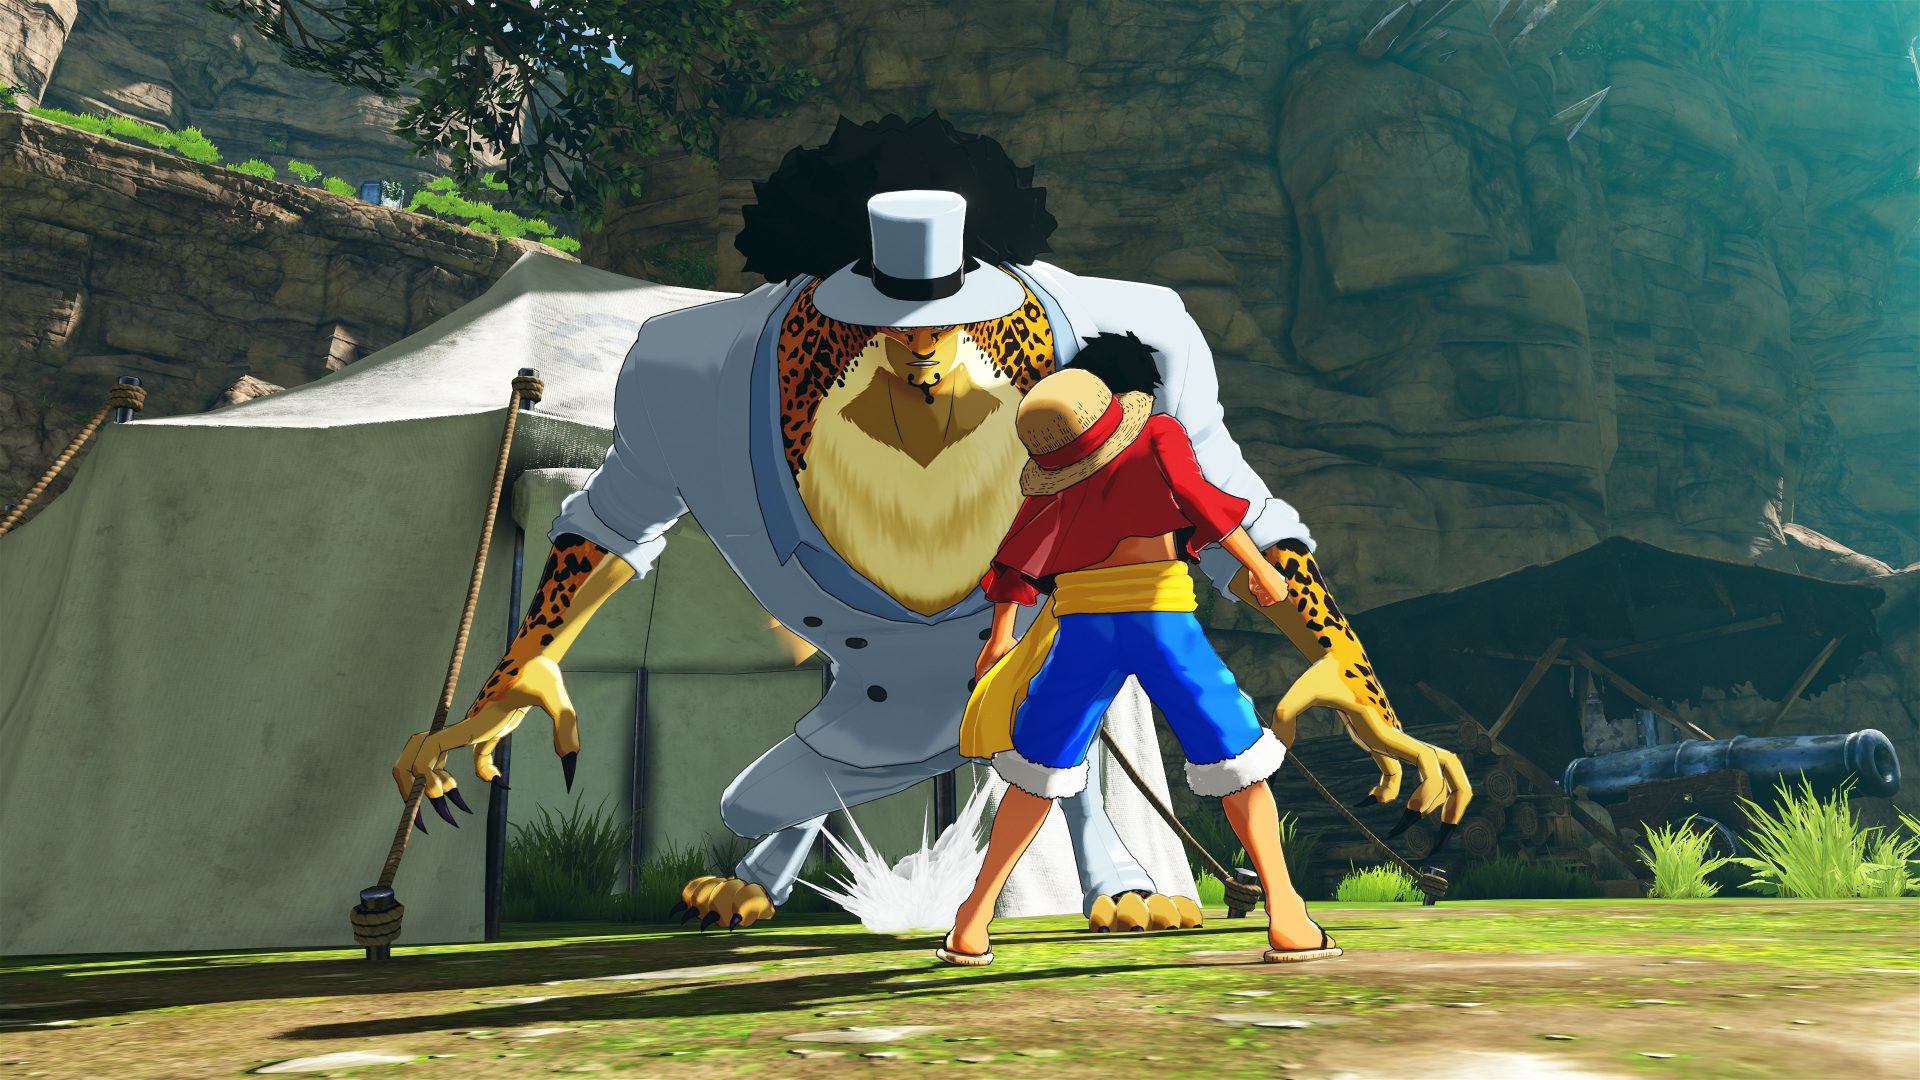 3 new characters announced for ONE PIECE WORLD SEEKER